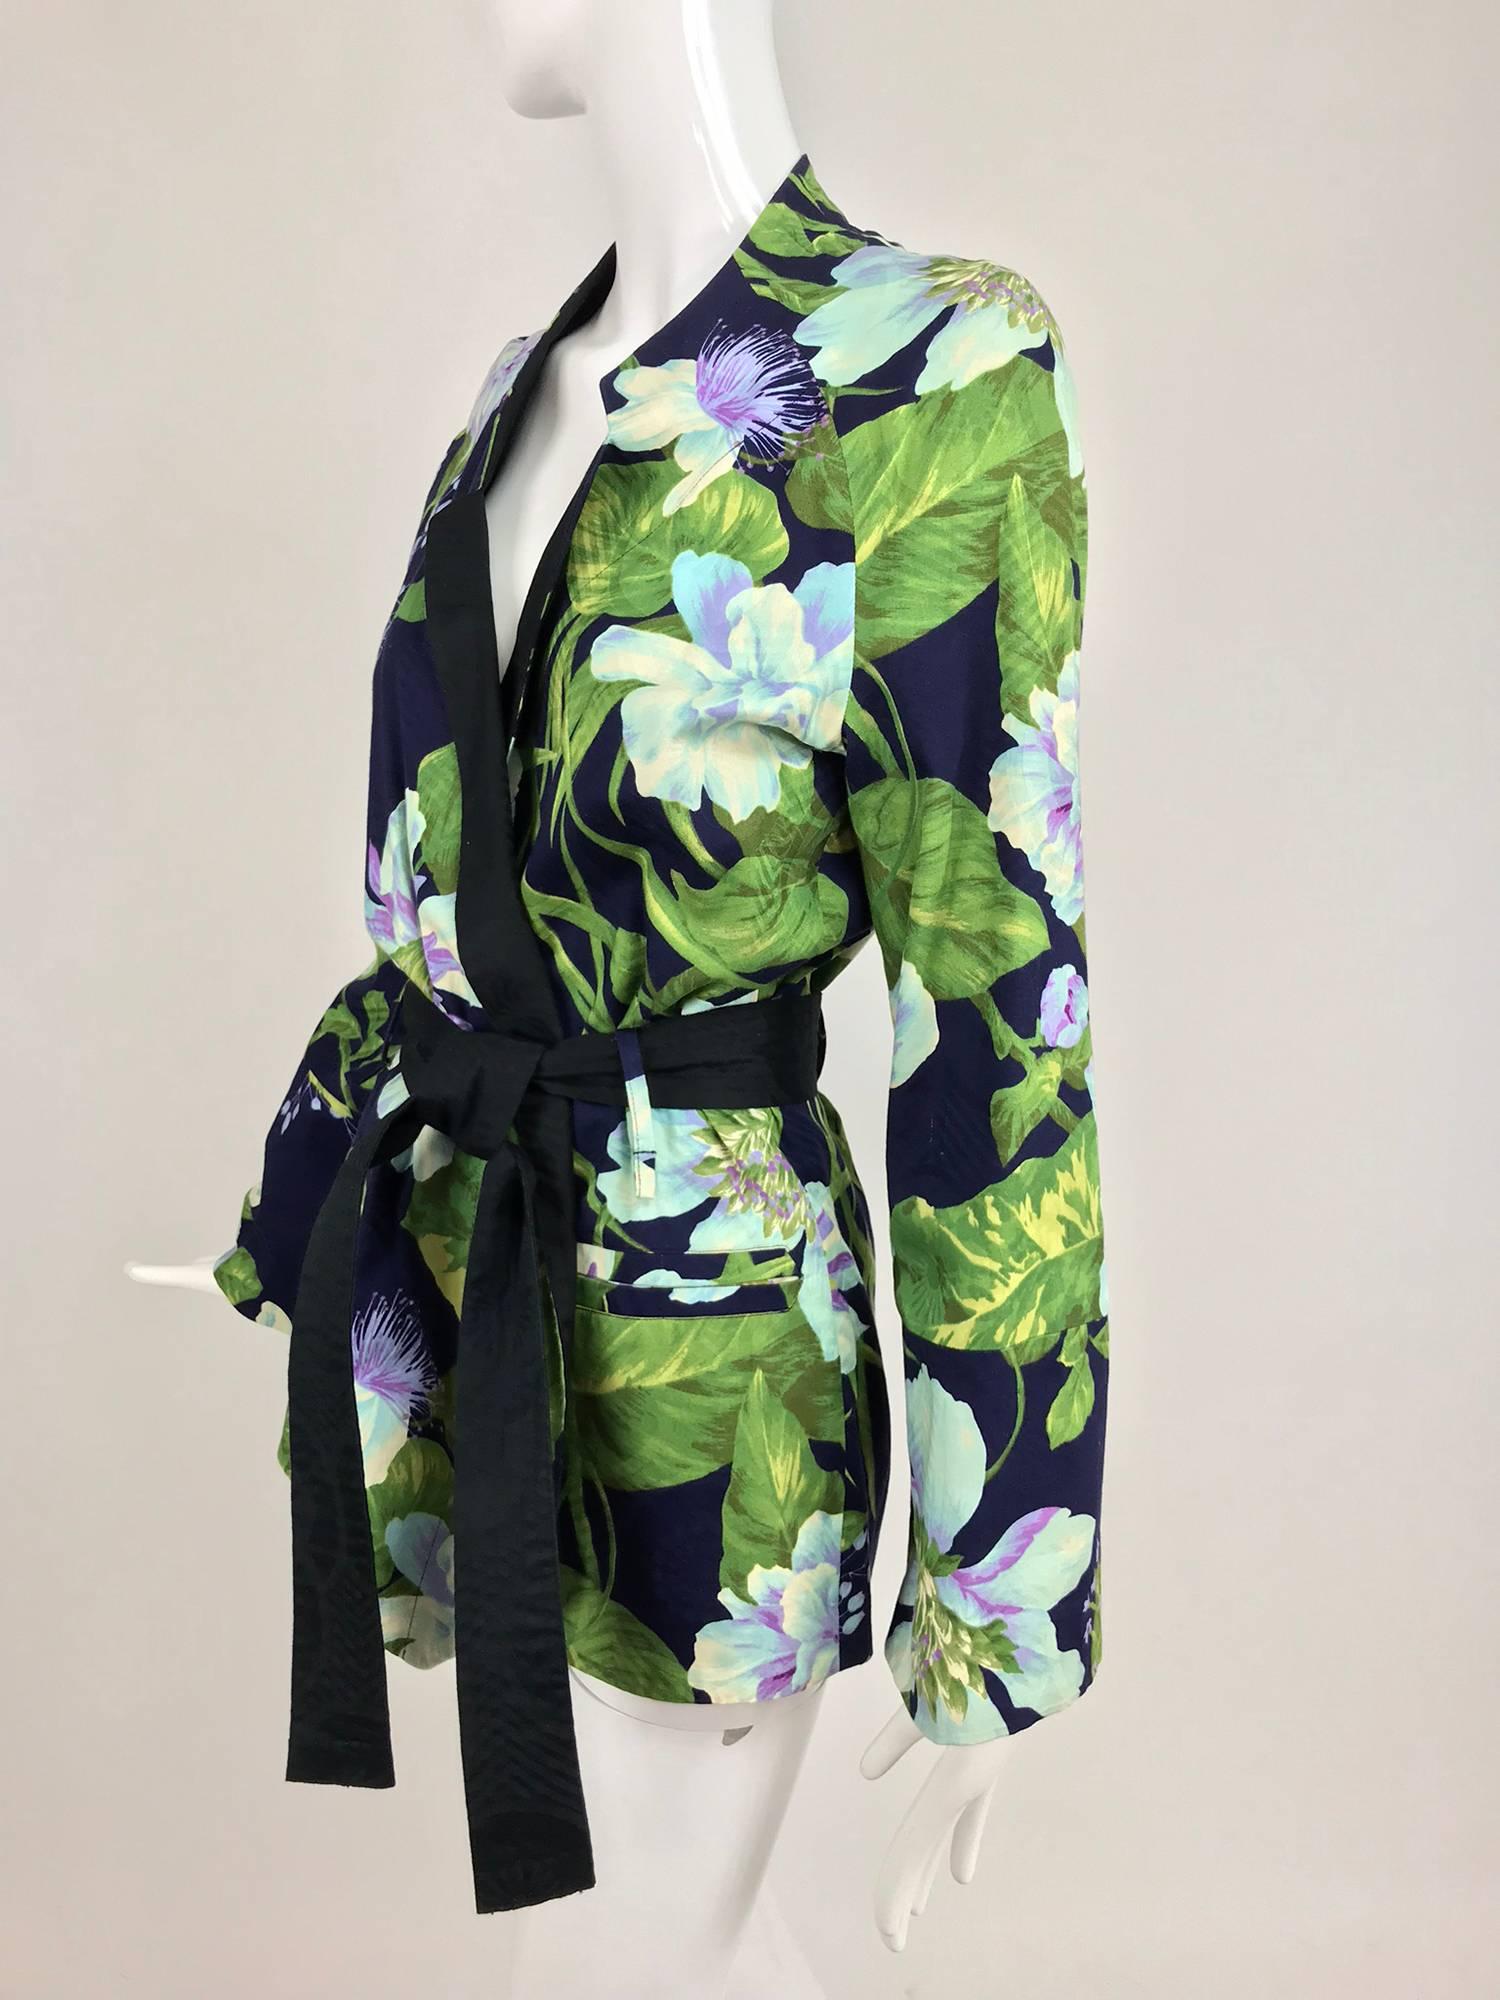 Kenzo Jungle tropical cotton print wrap jacket from the 1980s. Soft cotton jacket with long full raglan sleeves, notched collar it is hip length, wraps at the front with a matching fabric tie belt. Hip front besom pockets. The pieced lining is eye